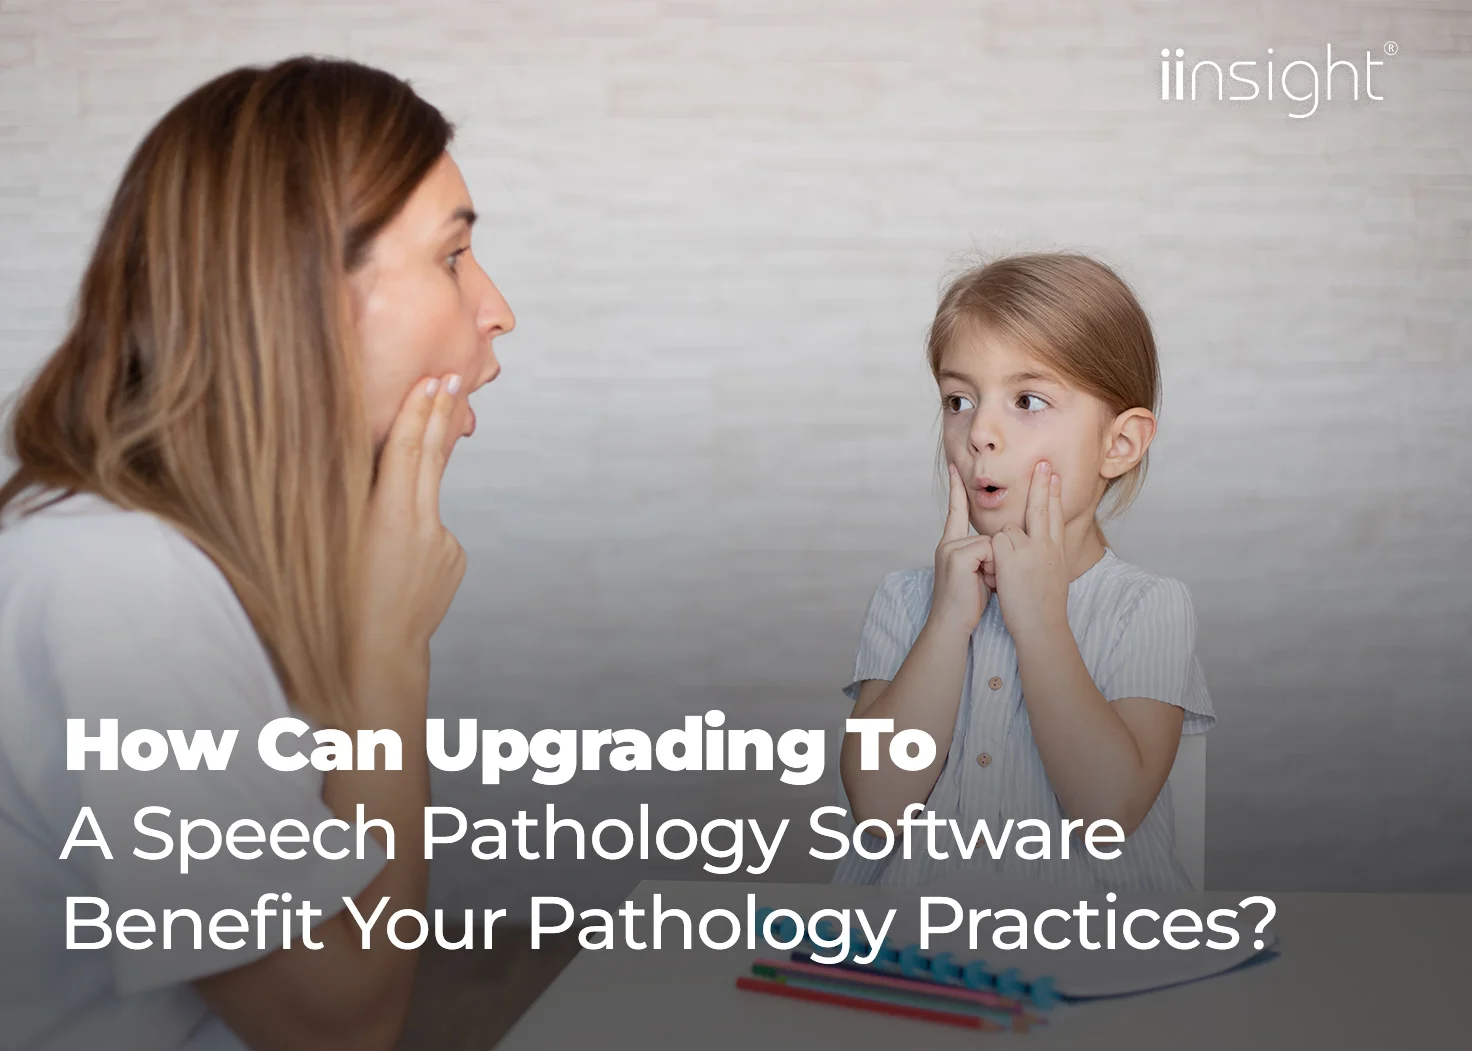 How Can Upgrading to a Speech Pathology Software Benefit Your Pathology Practices?